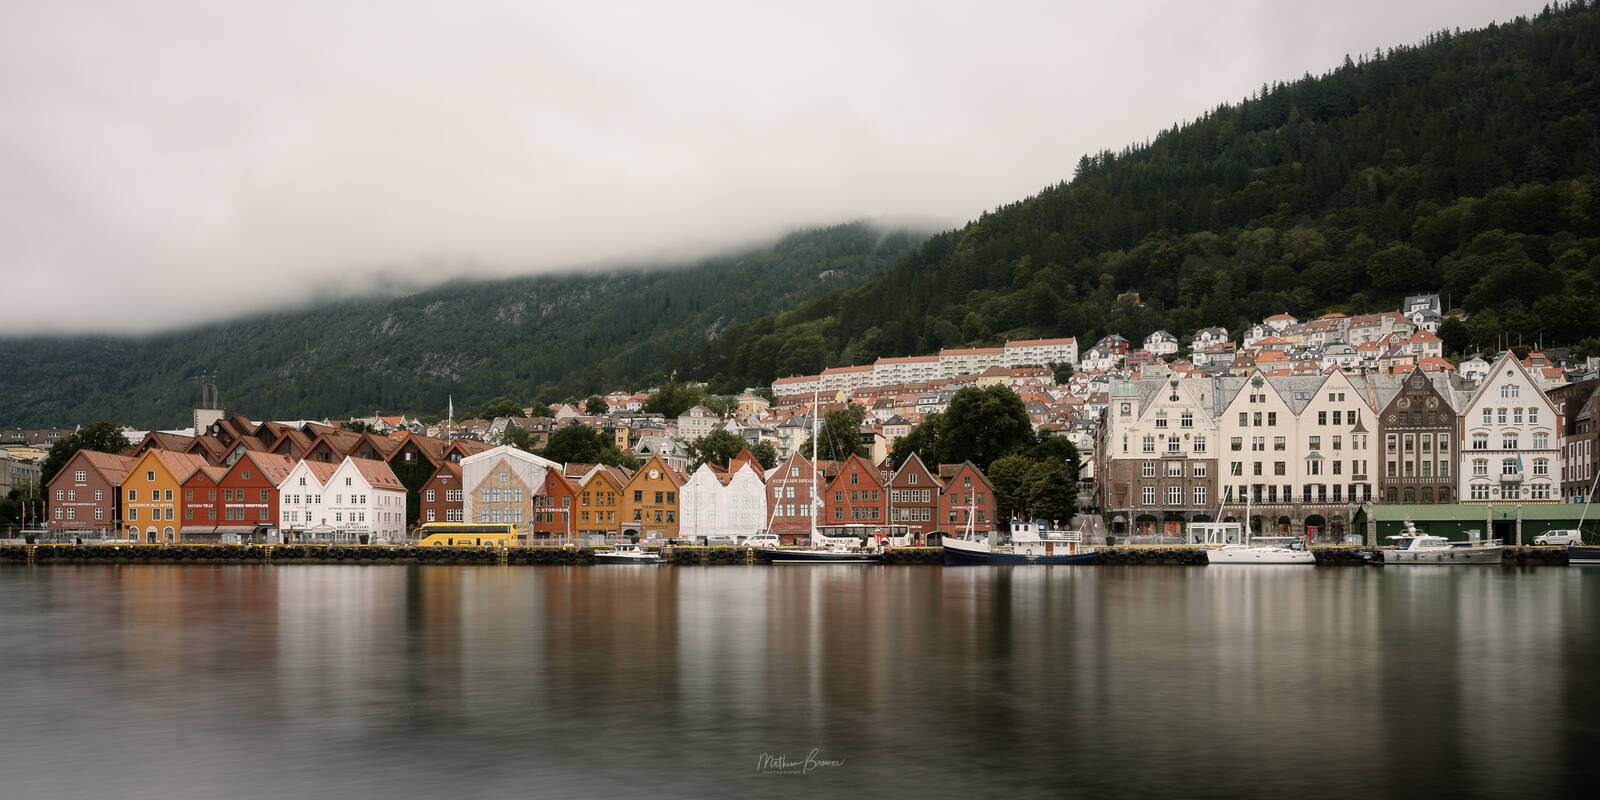 Image of Bryggen View by Mathew Browne